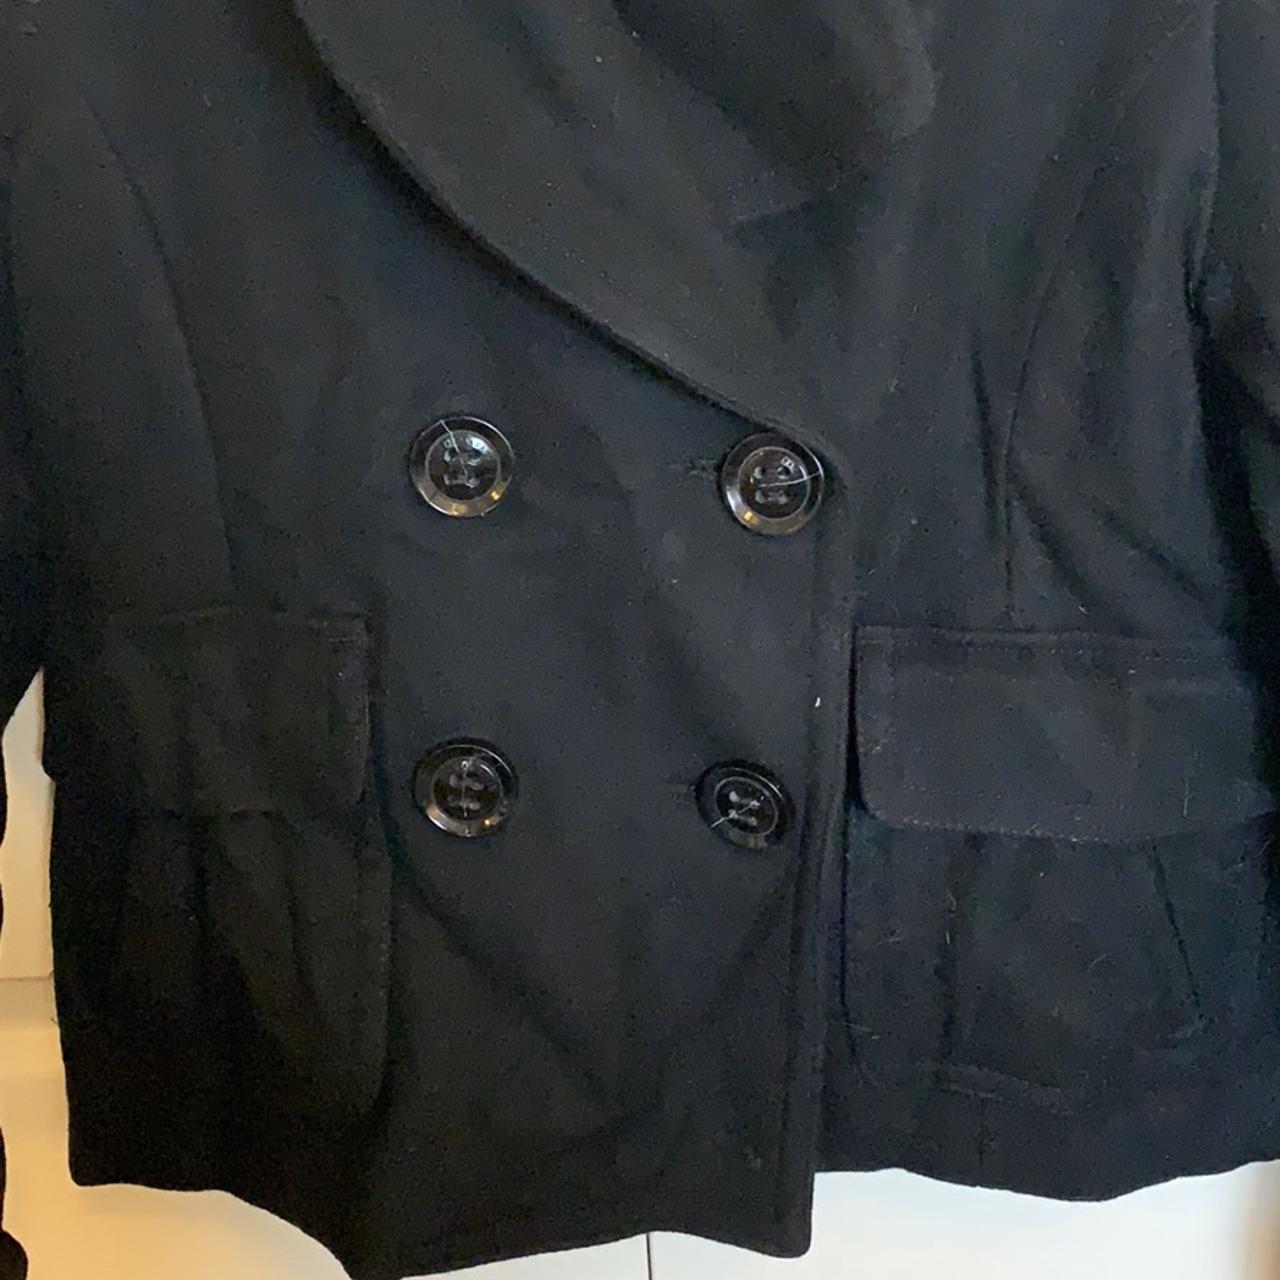 American Eagle Outfitters Women's Black Coat (2)